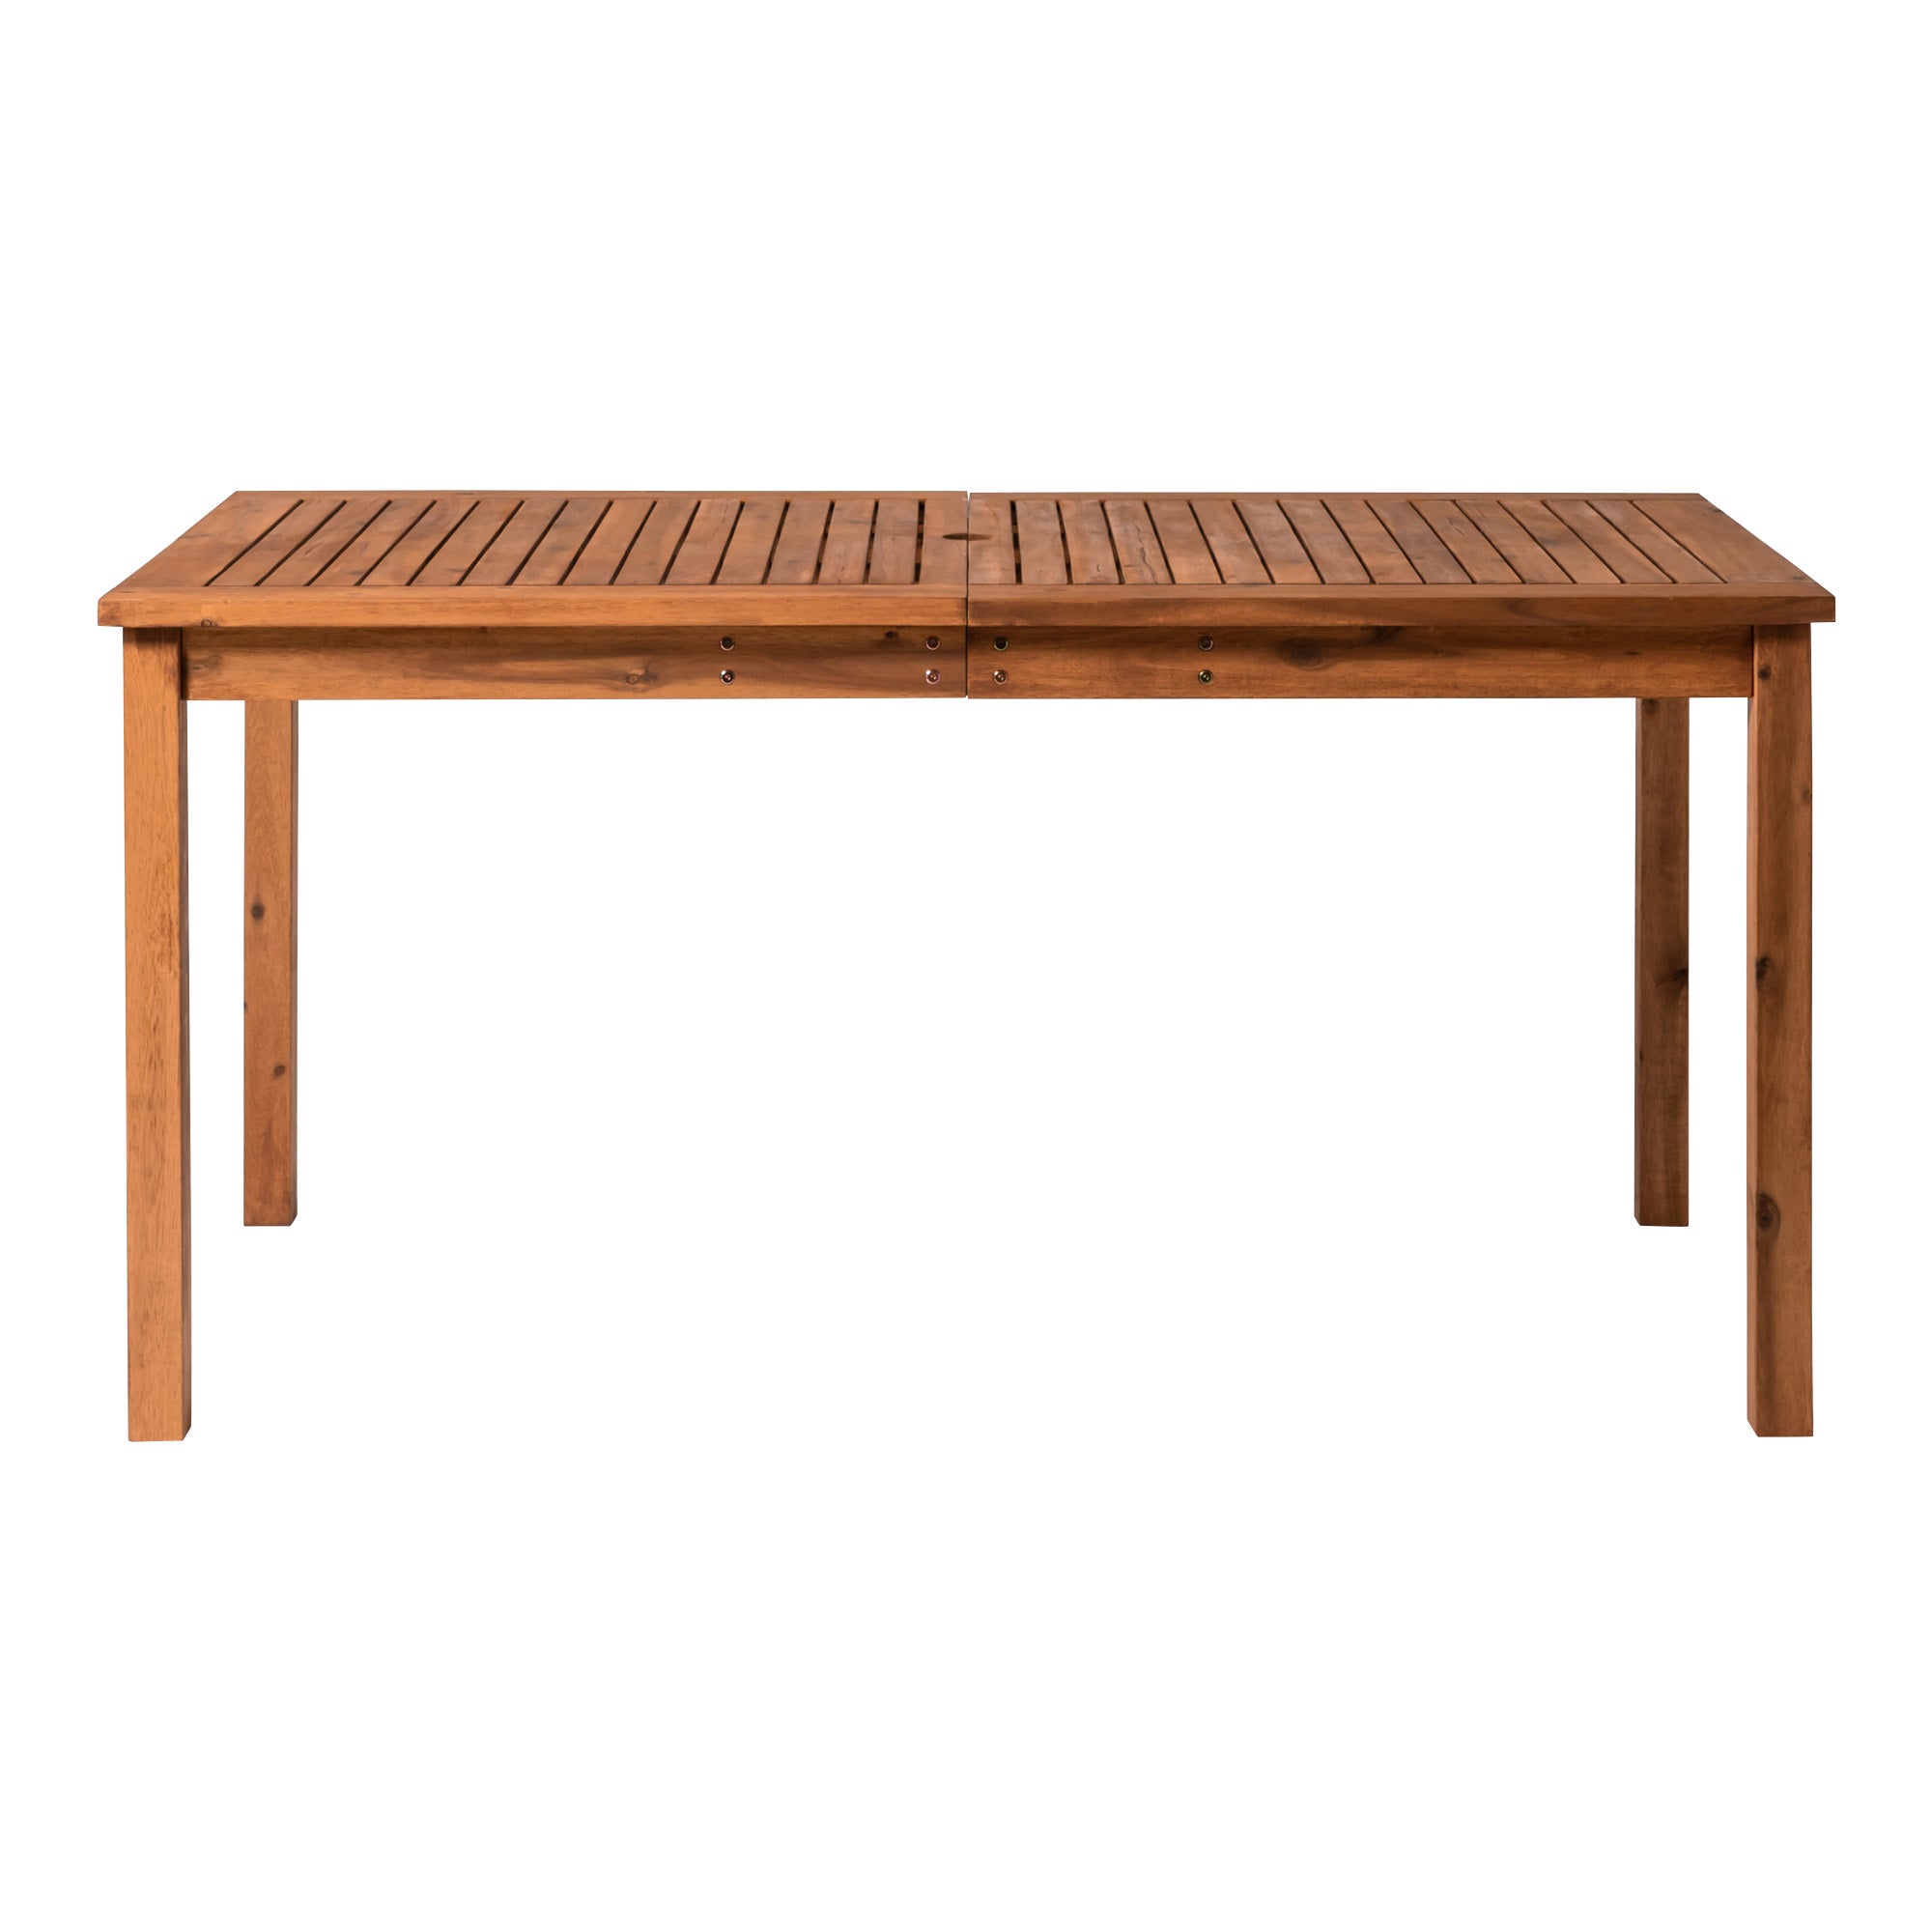 Blush Outdoor Slat-Top Acacia Wood Dining Table - Dining Tables